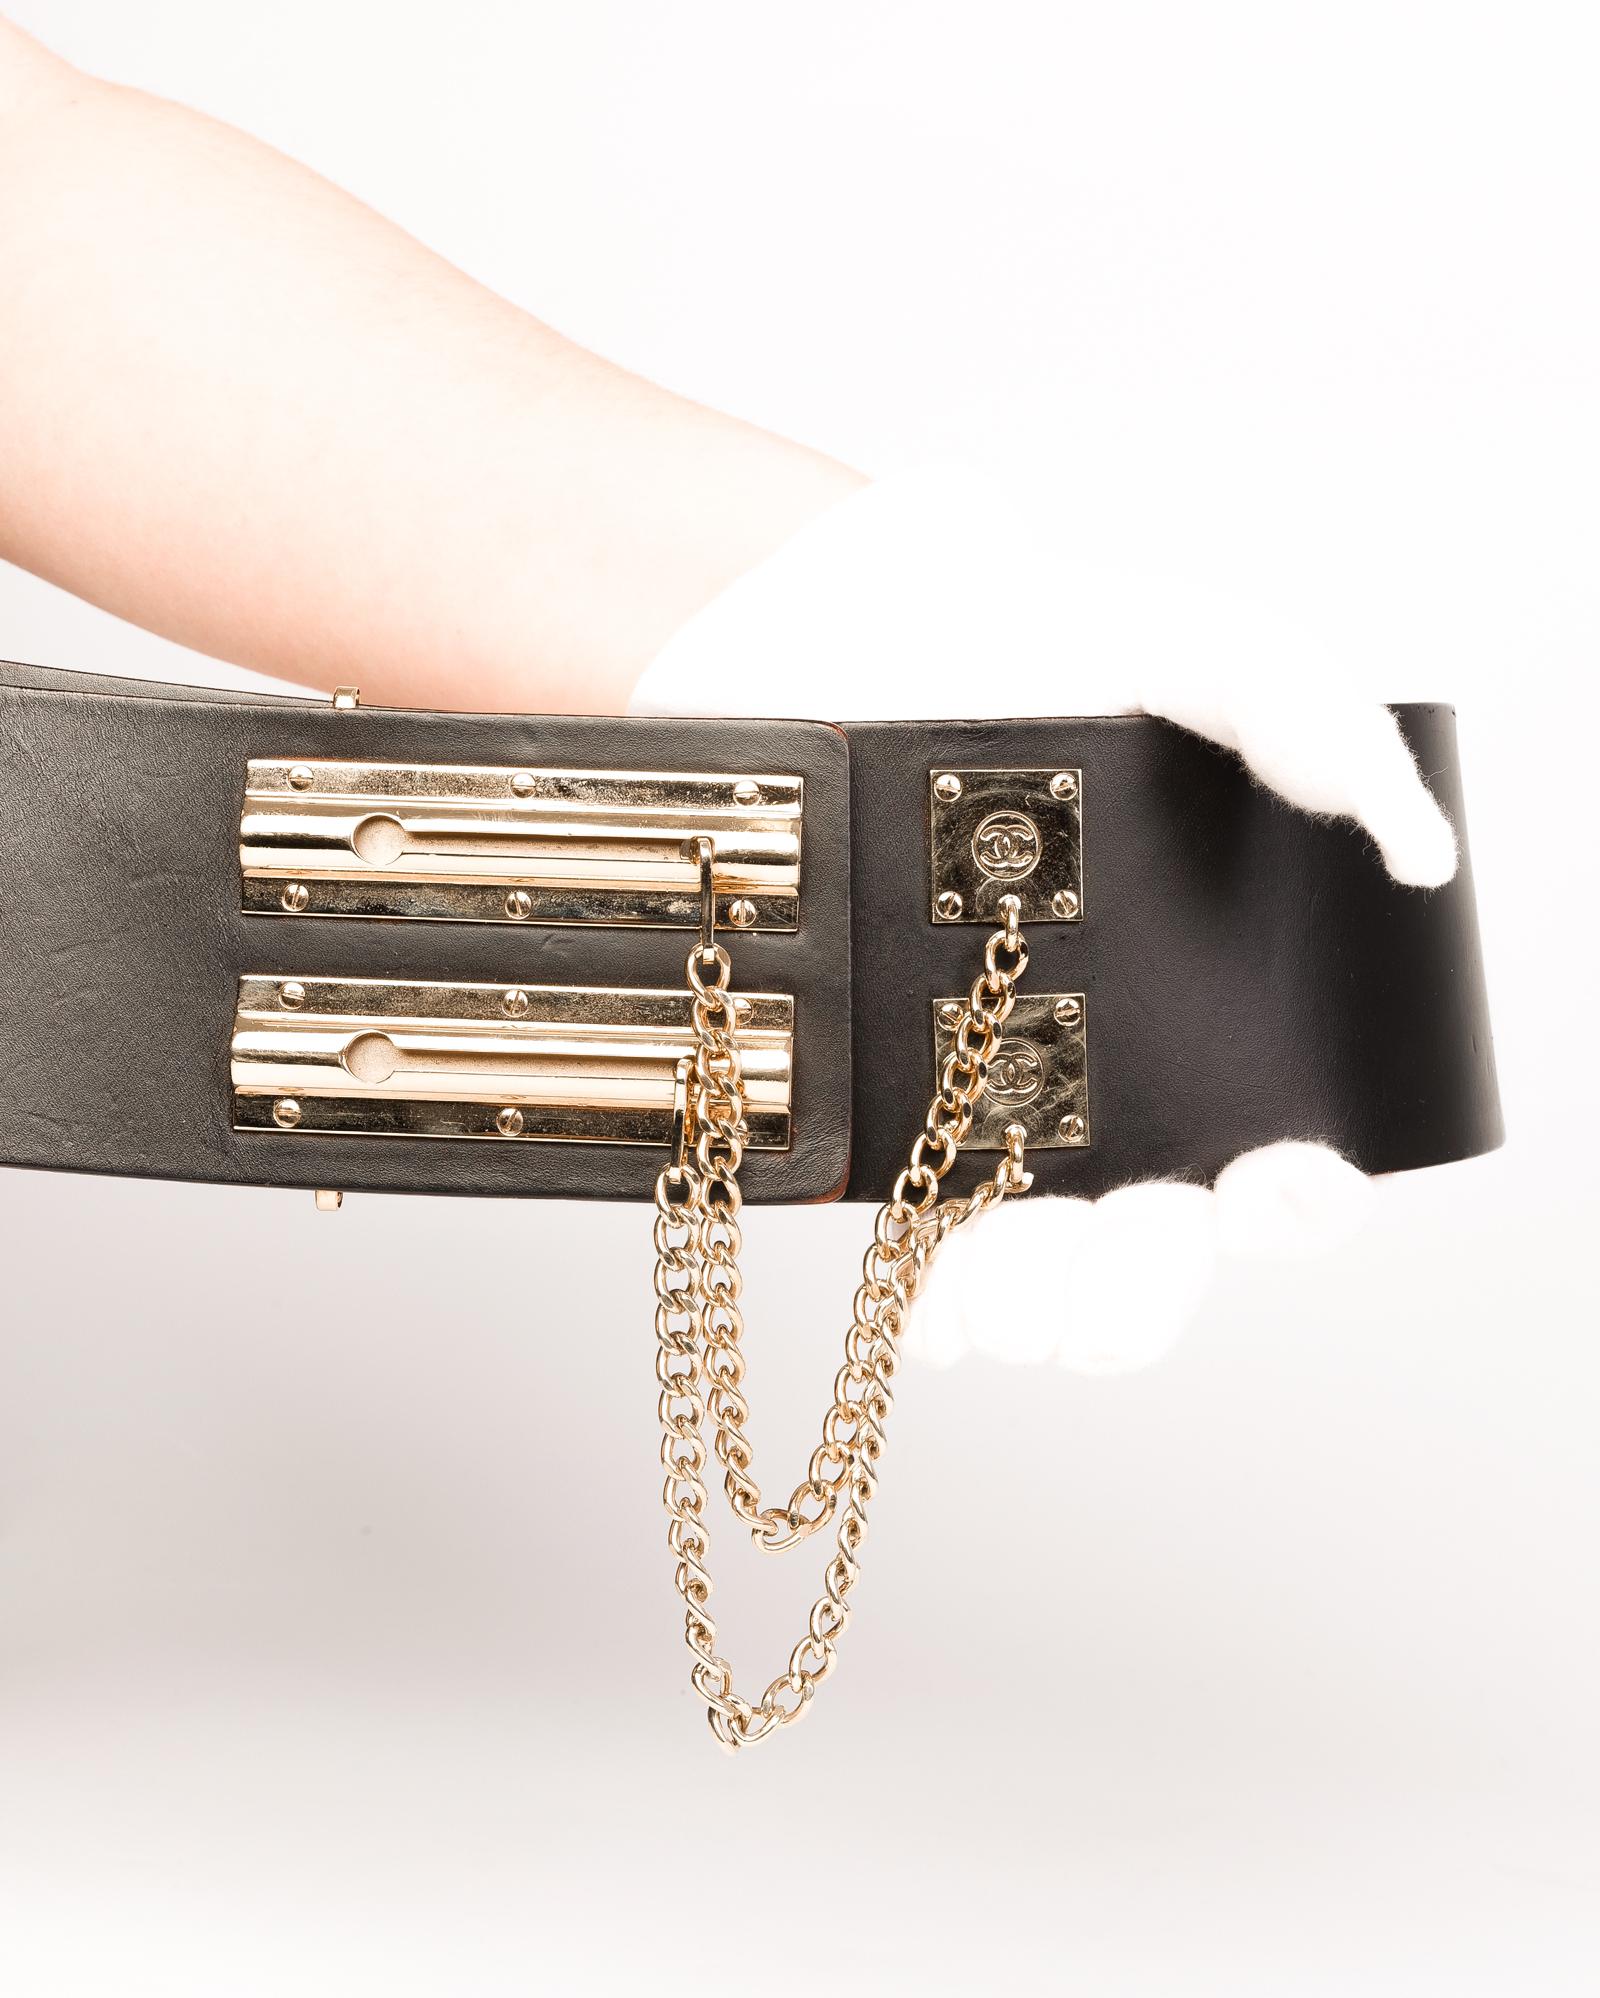 Chanel Black Leather Maxi Belt (size 90/36) In Excellent Condition For Sale In Montreal, Quebec